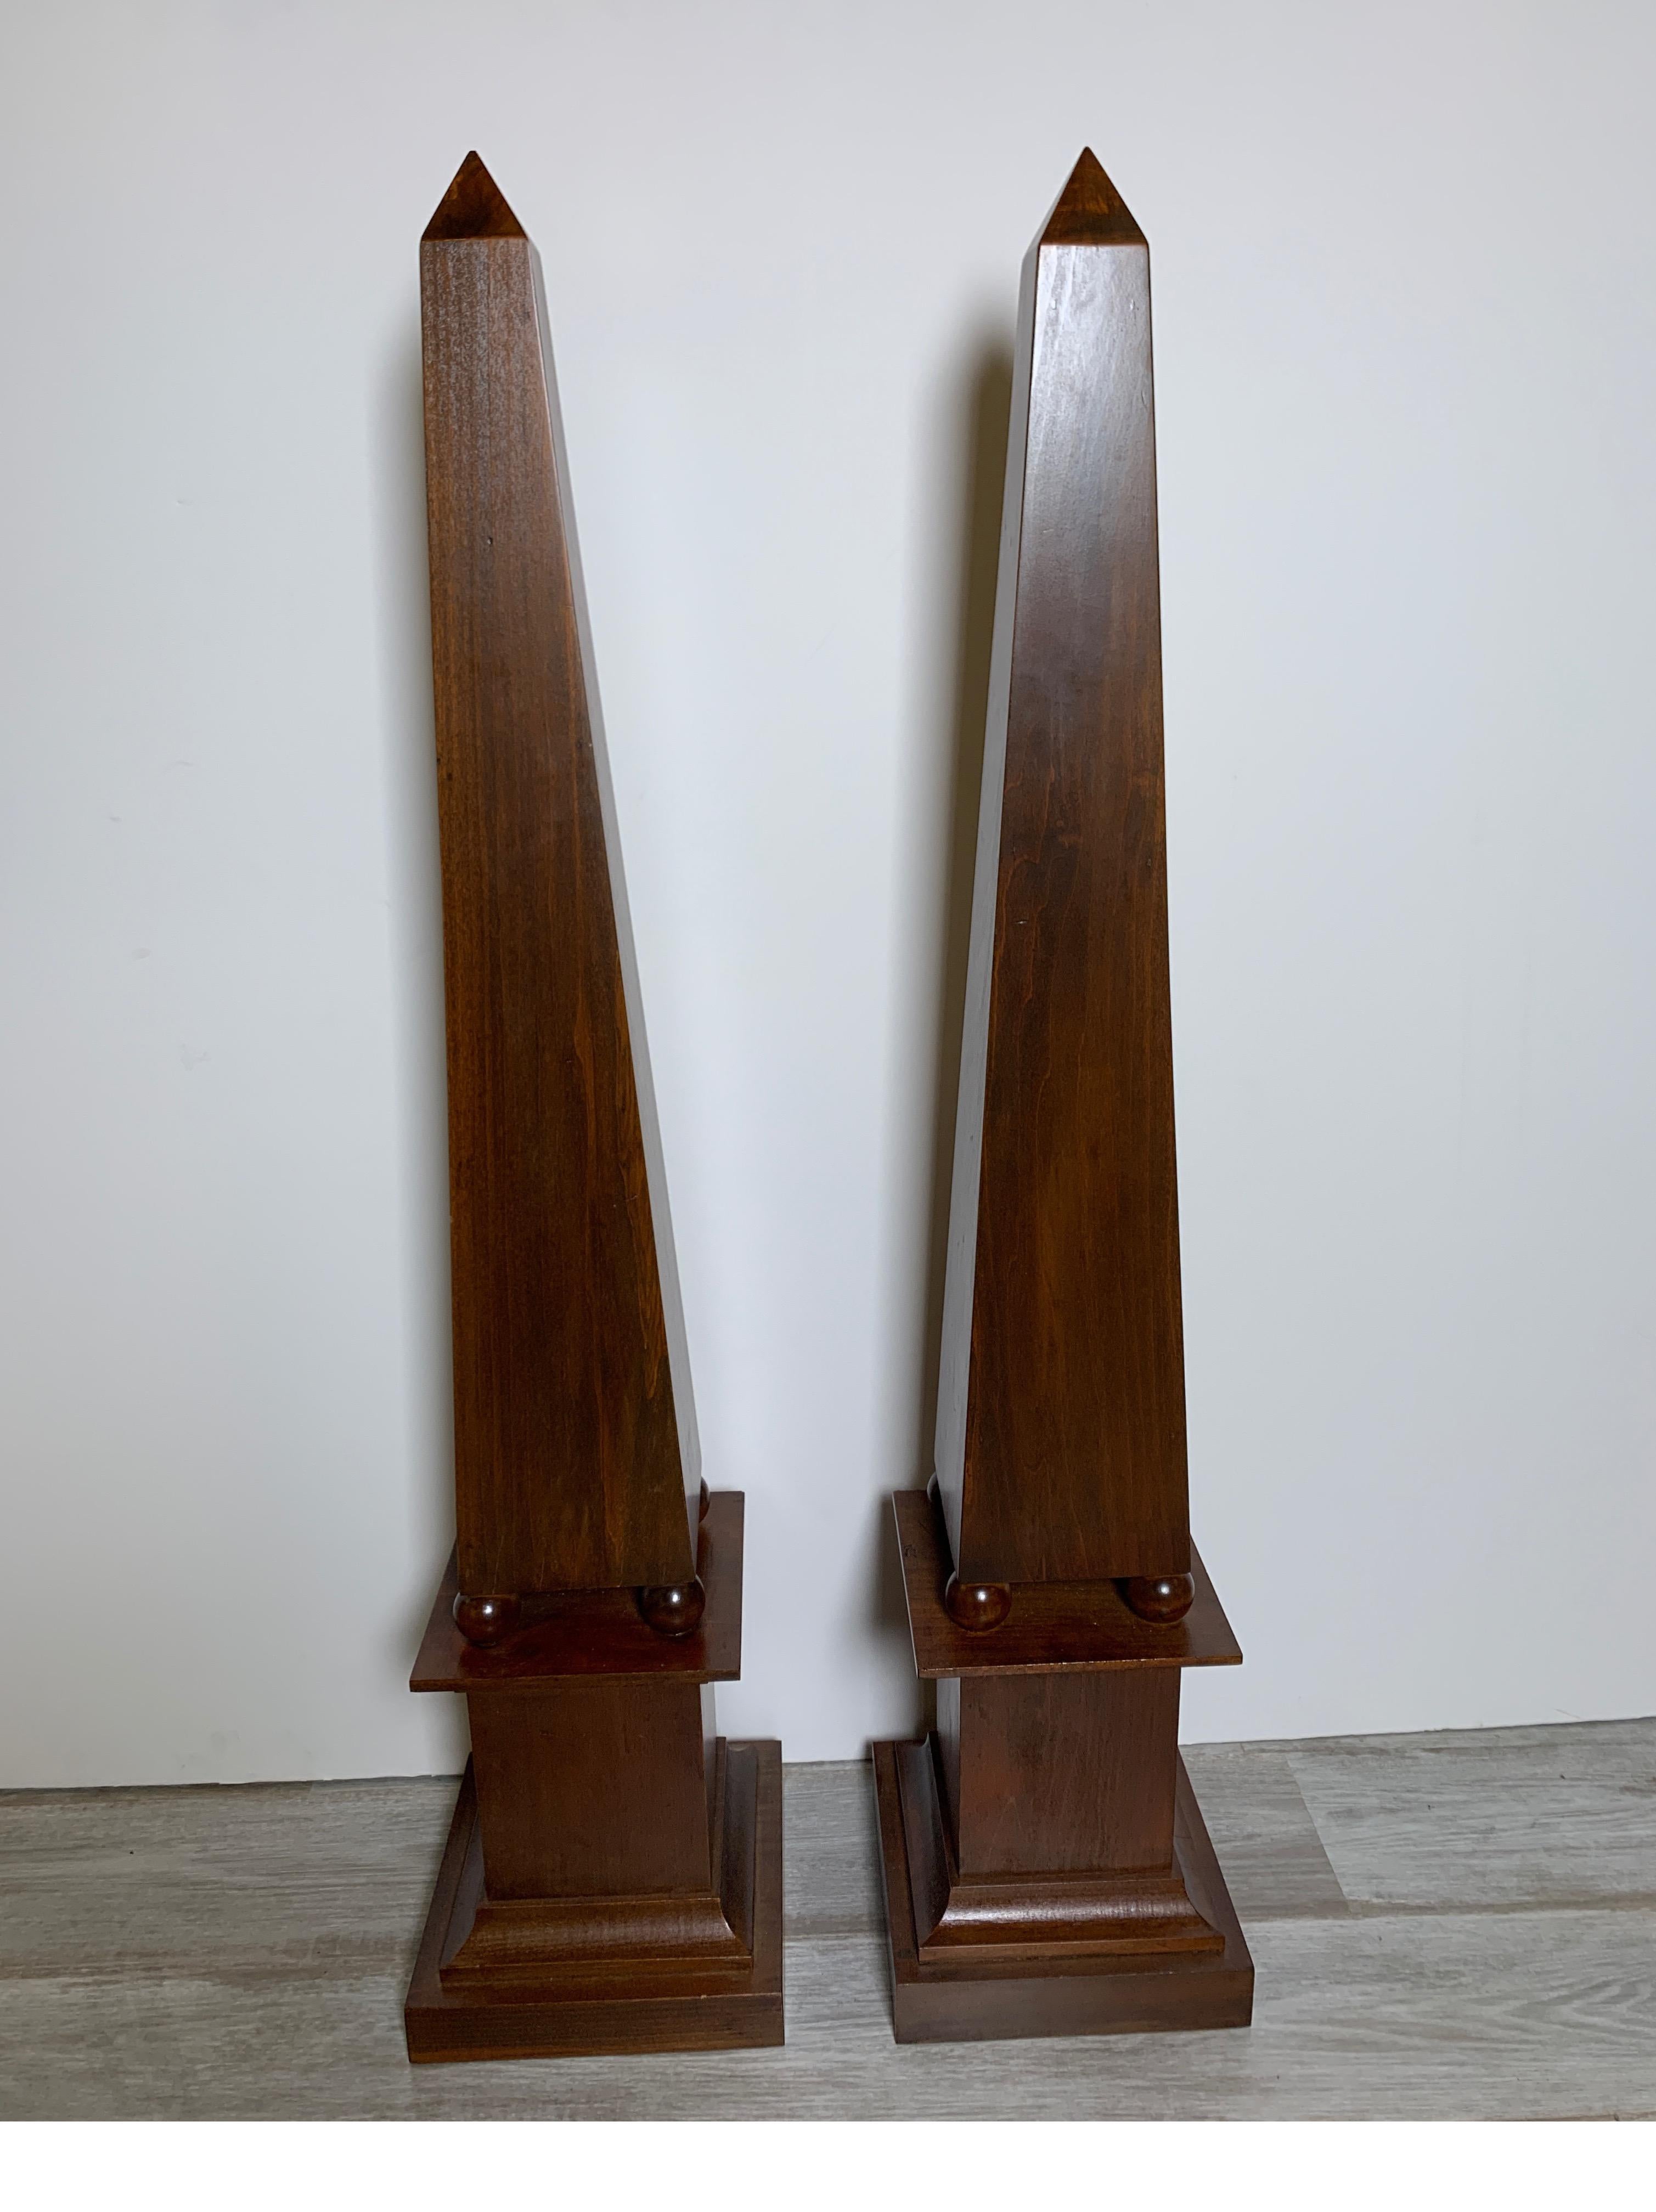 A Classic pair of 42 inch tall mahogany finish obelisks. The elegant pair in a warm rich wood finish.